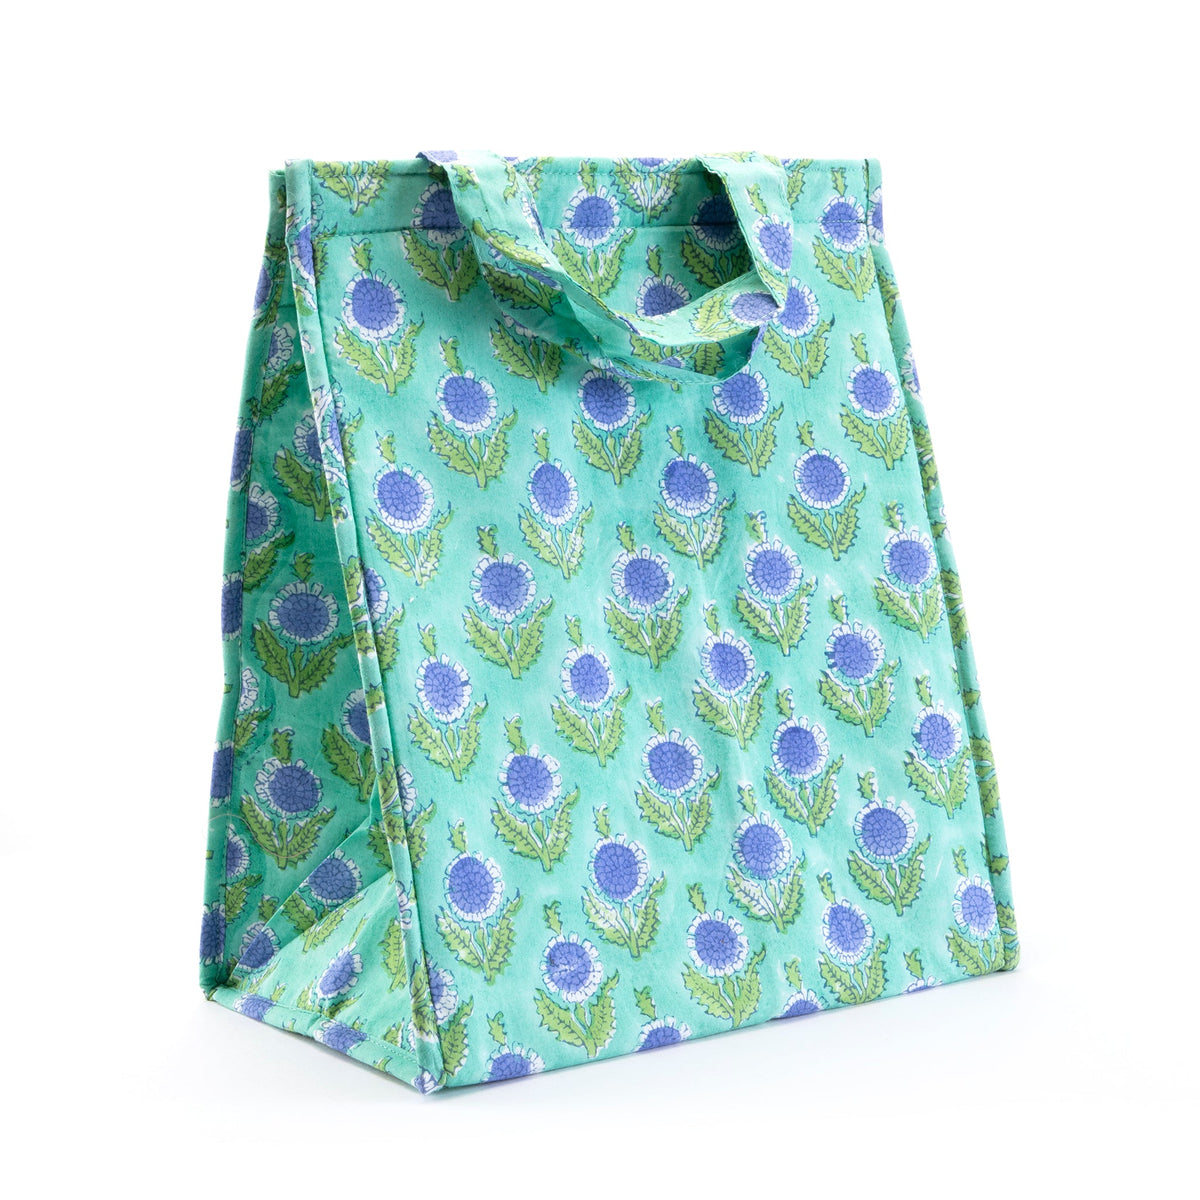 Handblocked Insulated Lunch Tote Green